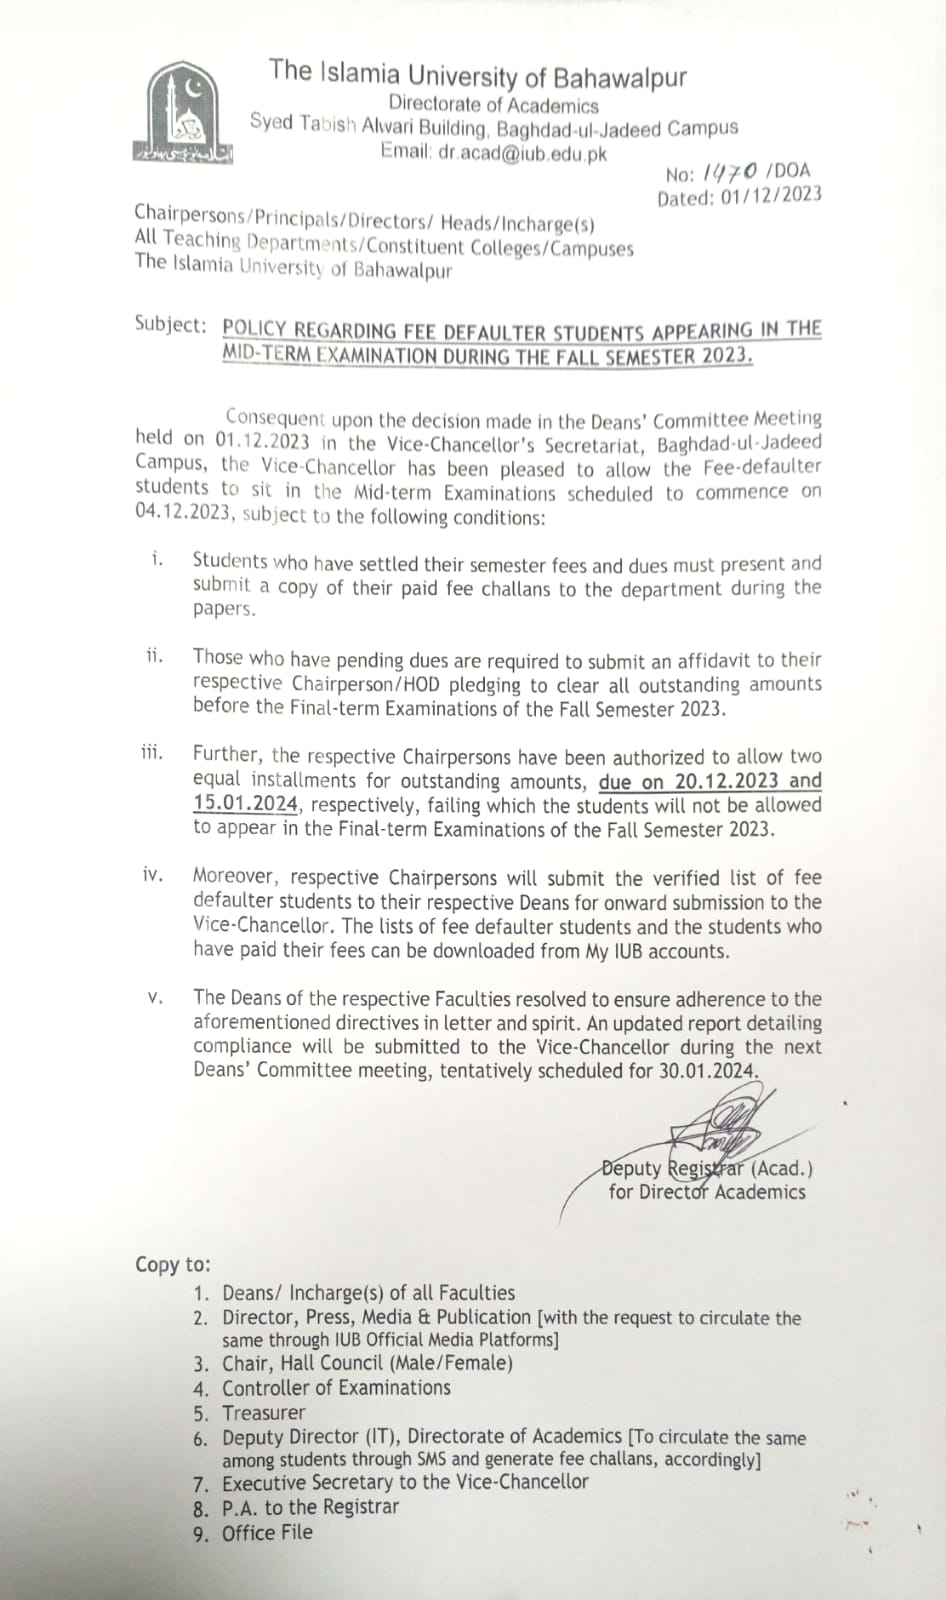 notification regarding fee defaulter students appreaing in the Midterm Examination during the fall semester 2023